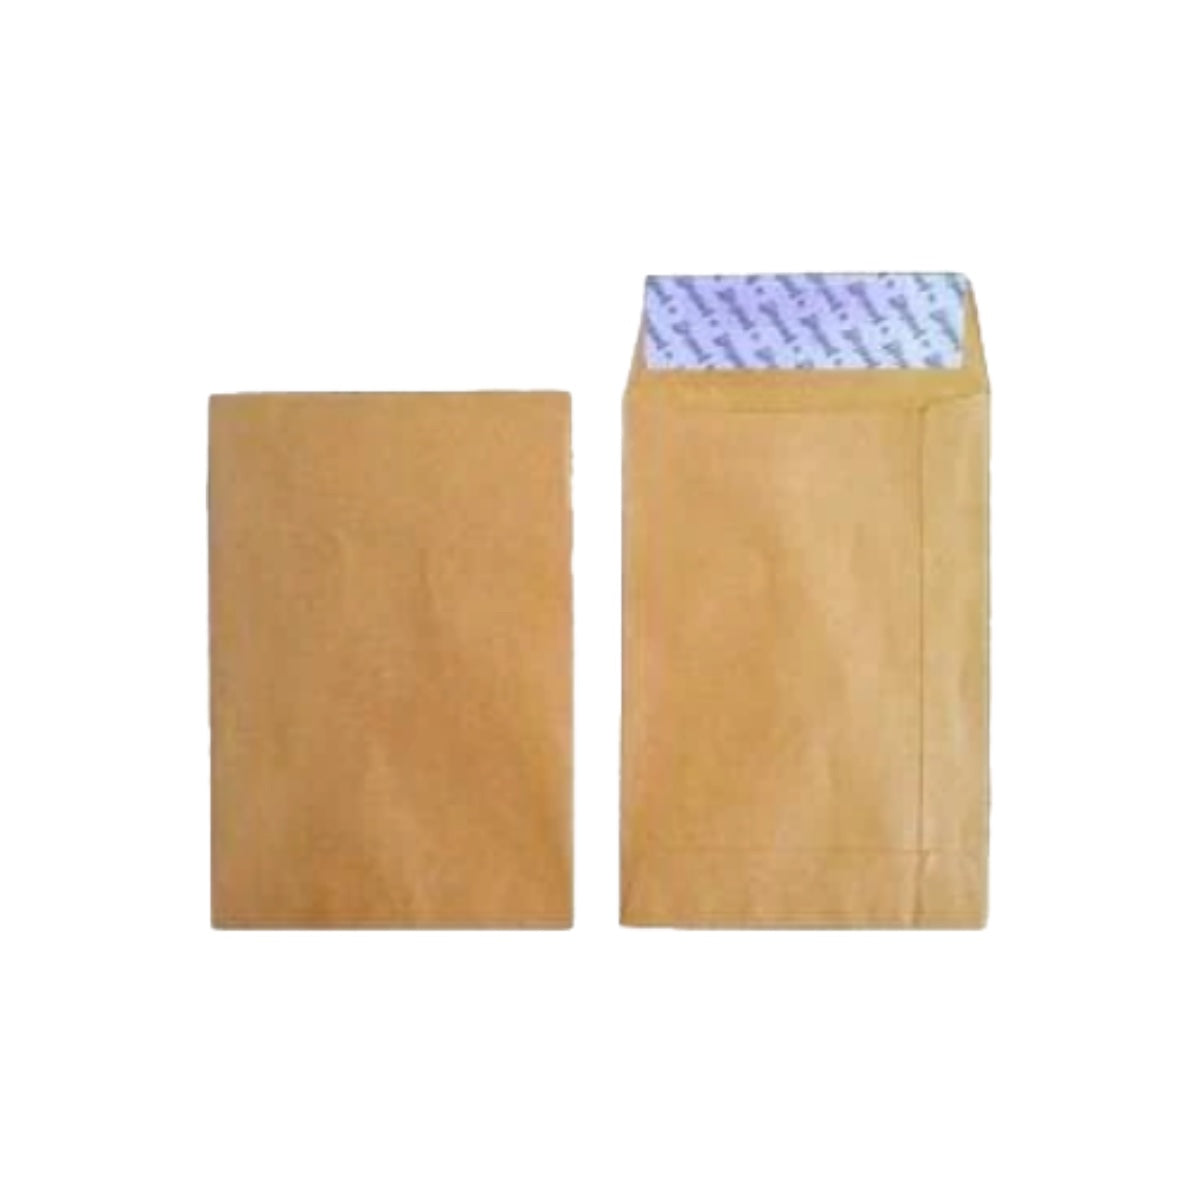 Hispapel Envelope 152 x 102 mm, 6 x 4 inches, 80gsm, Brown